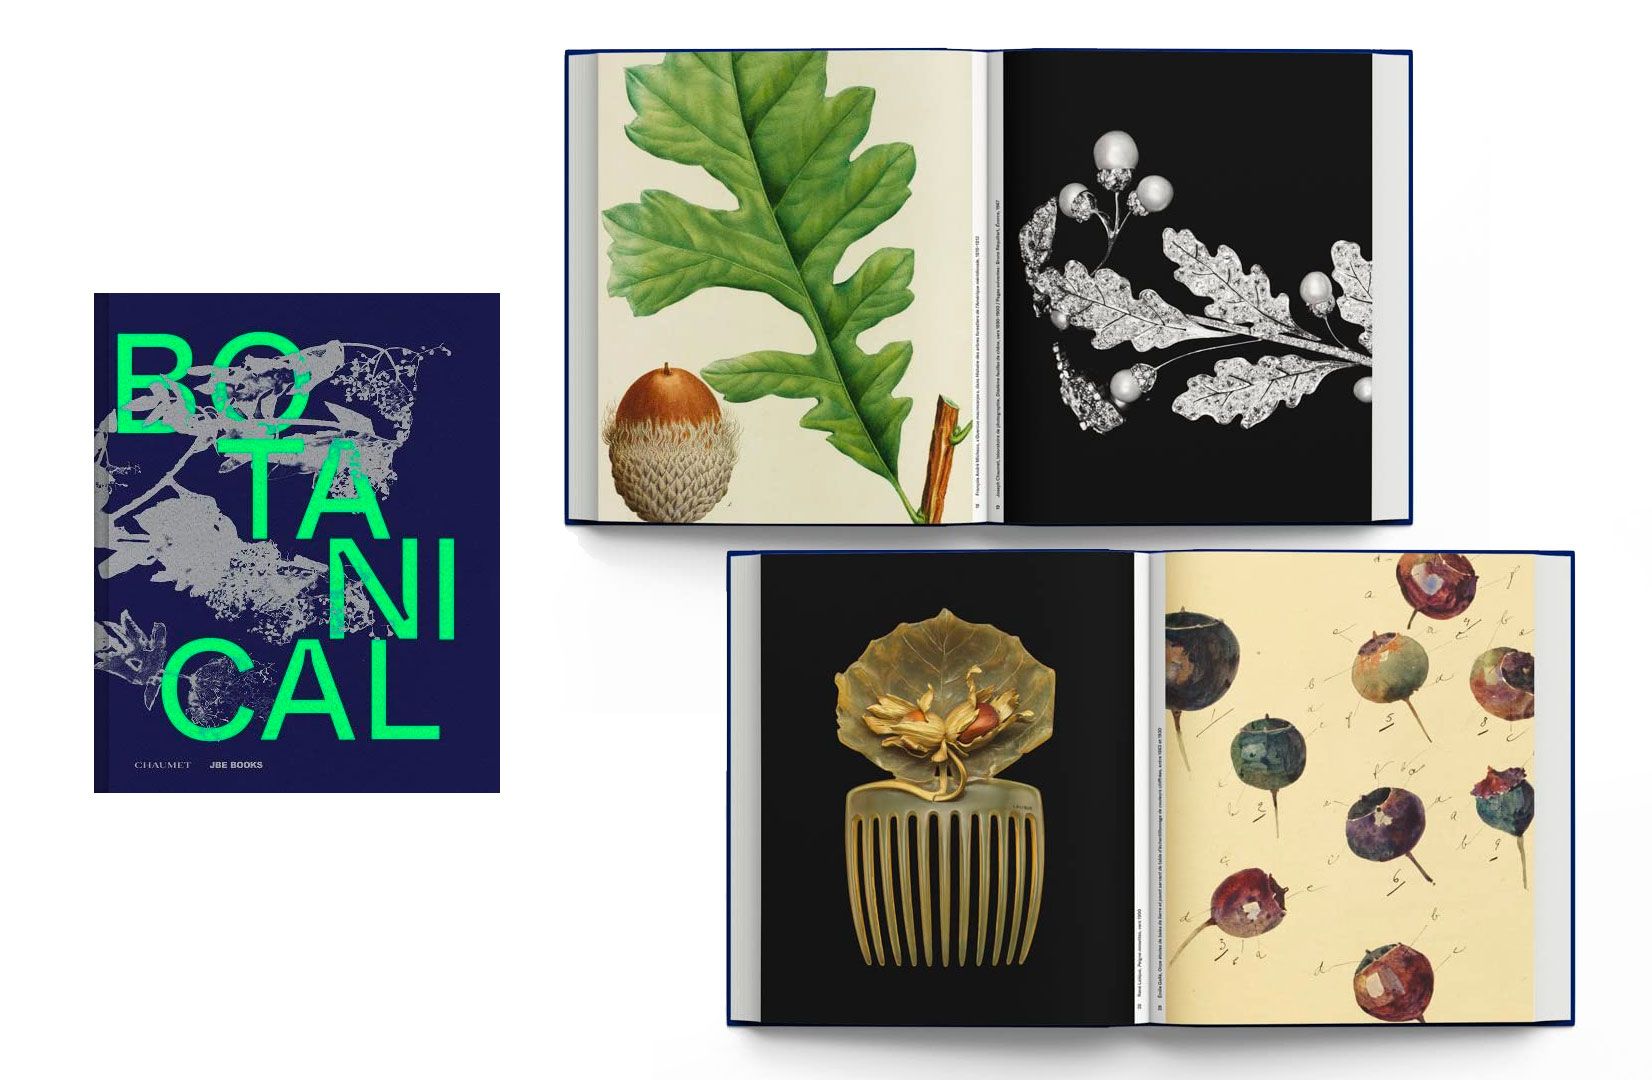 Coffee table book Botanical - Observing Beauty by Chaumet and published by JBE Books, alongside two inside shots displaying pieces of jewellery inspired by nature 